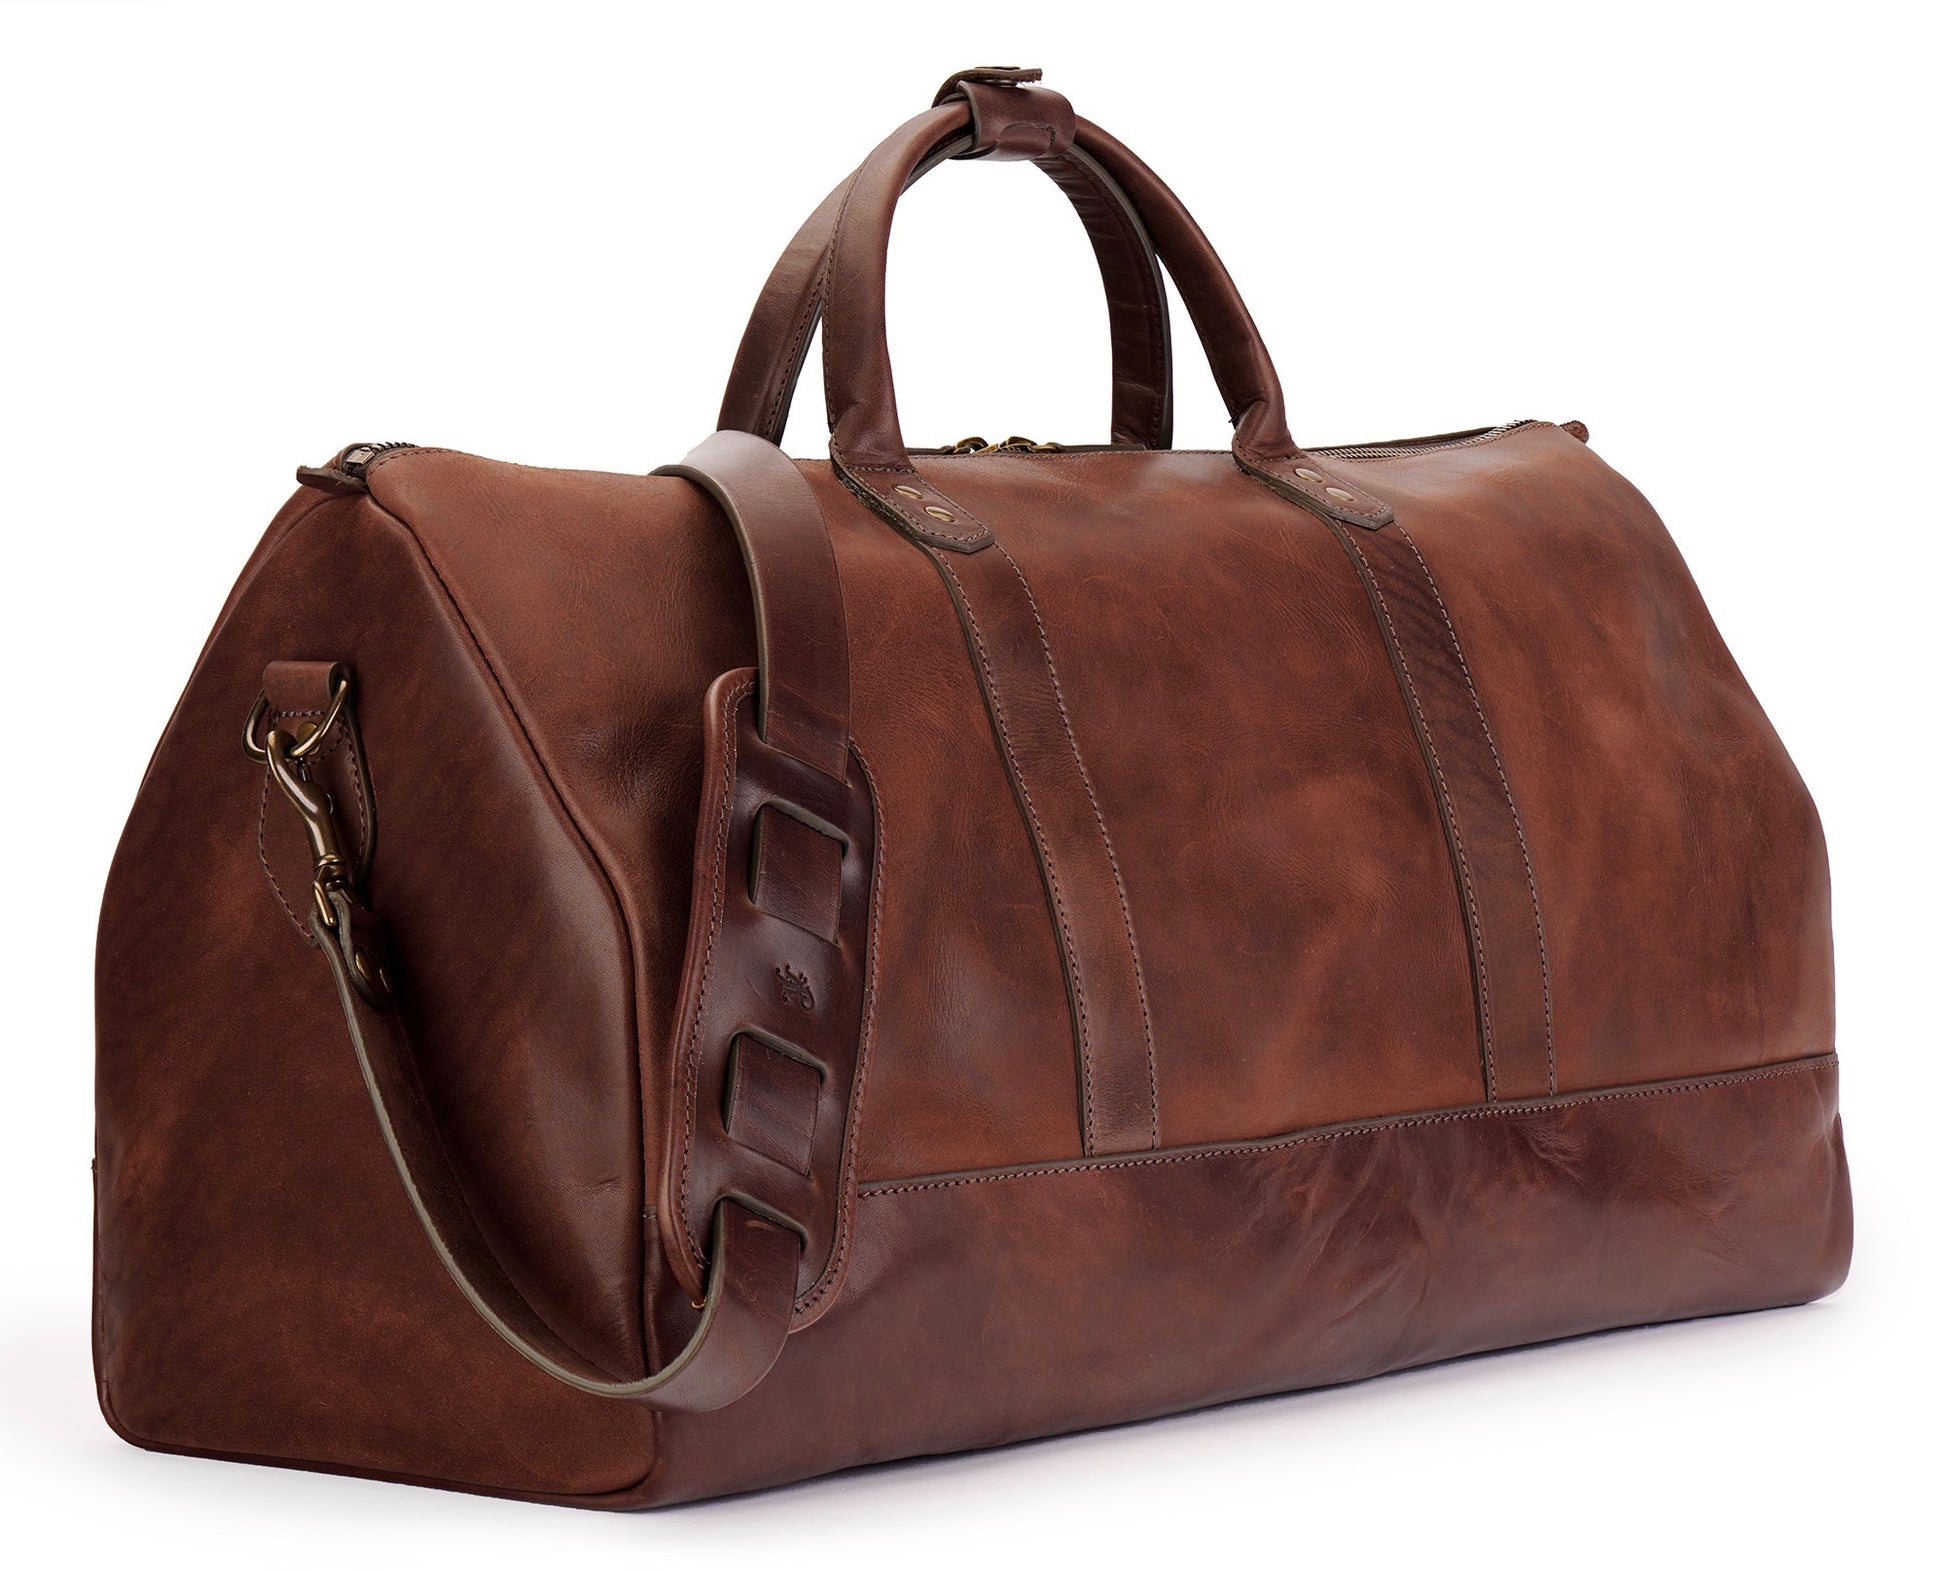 angle view of full grain leather duffel bag in vintage brown color